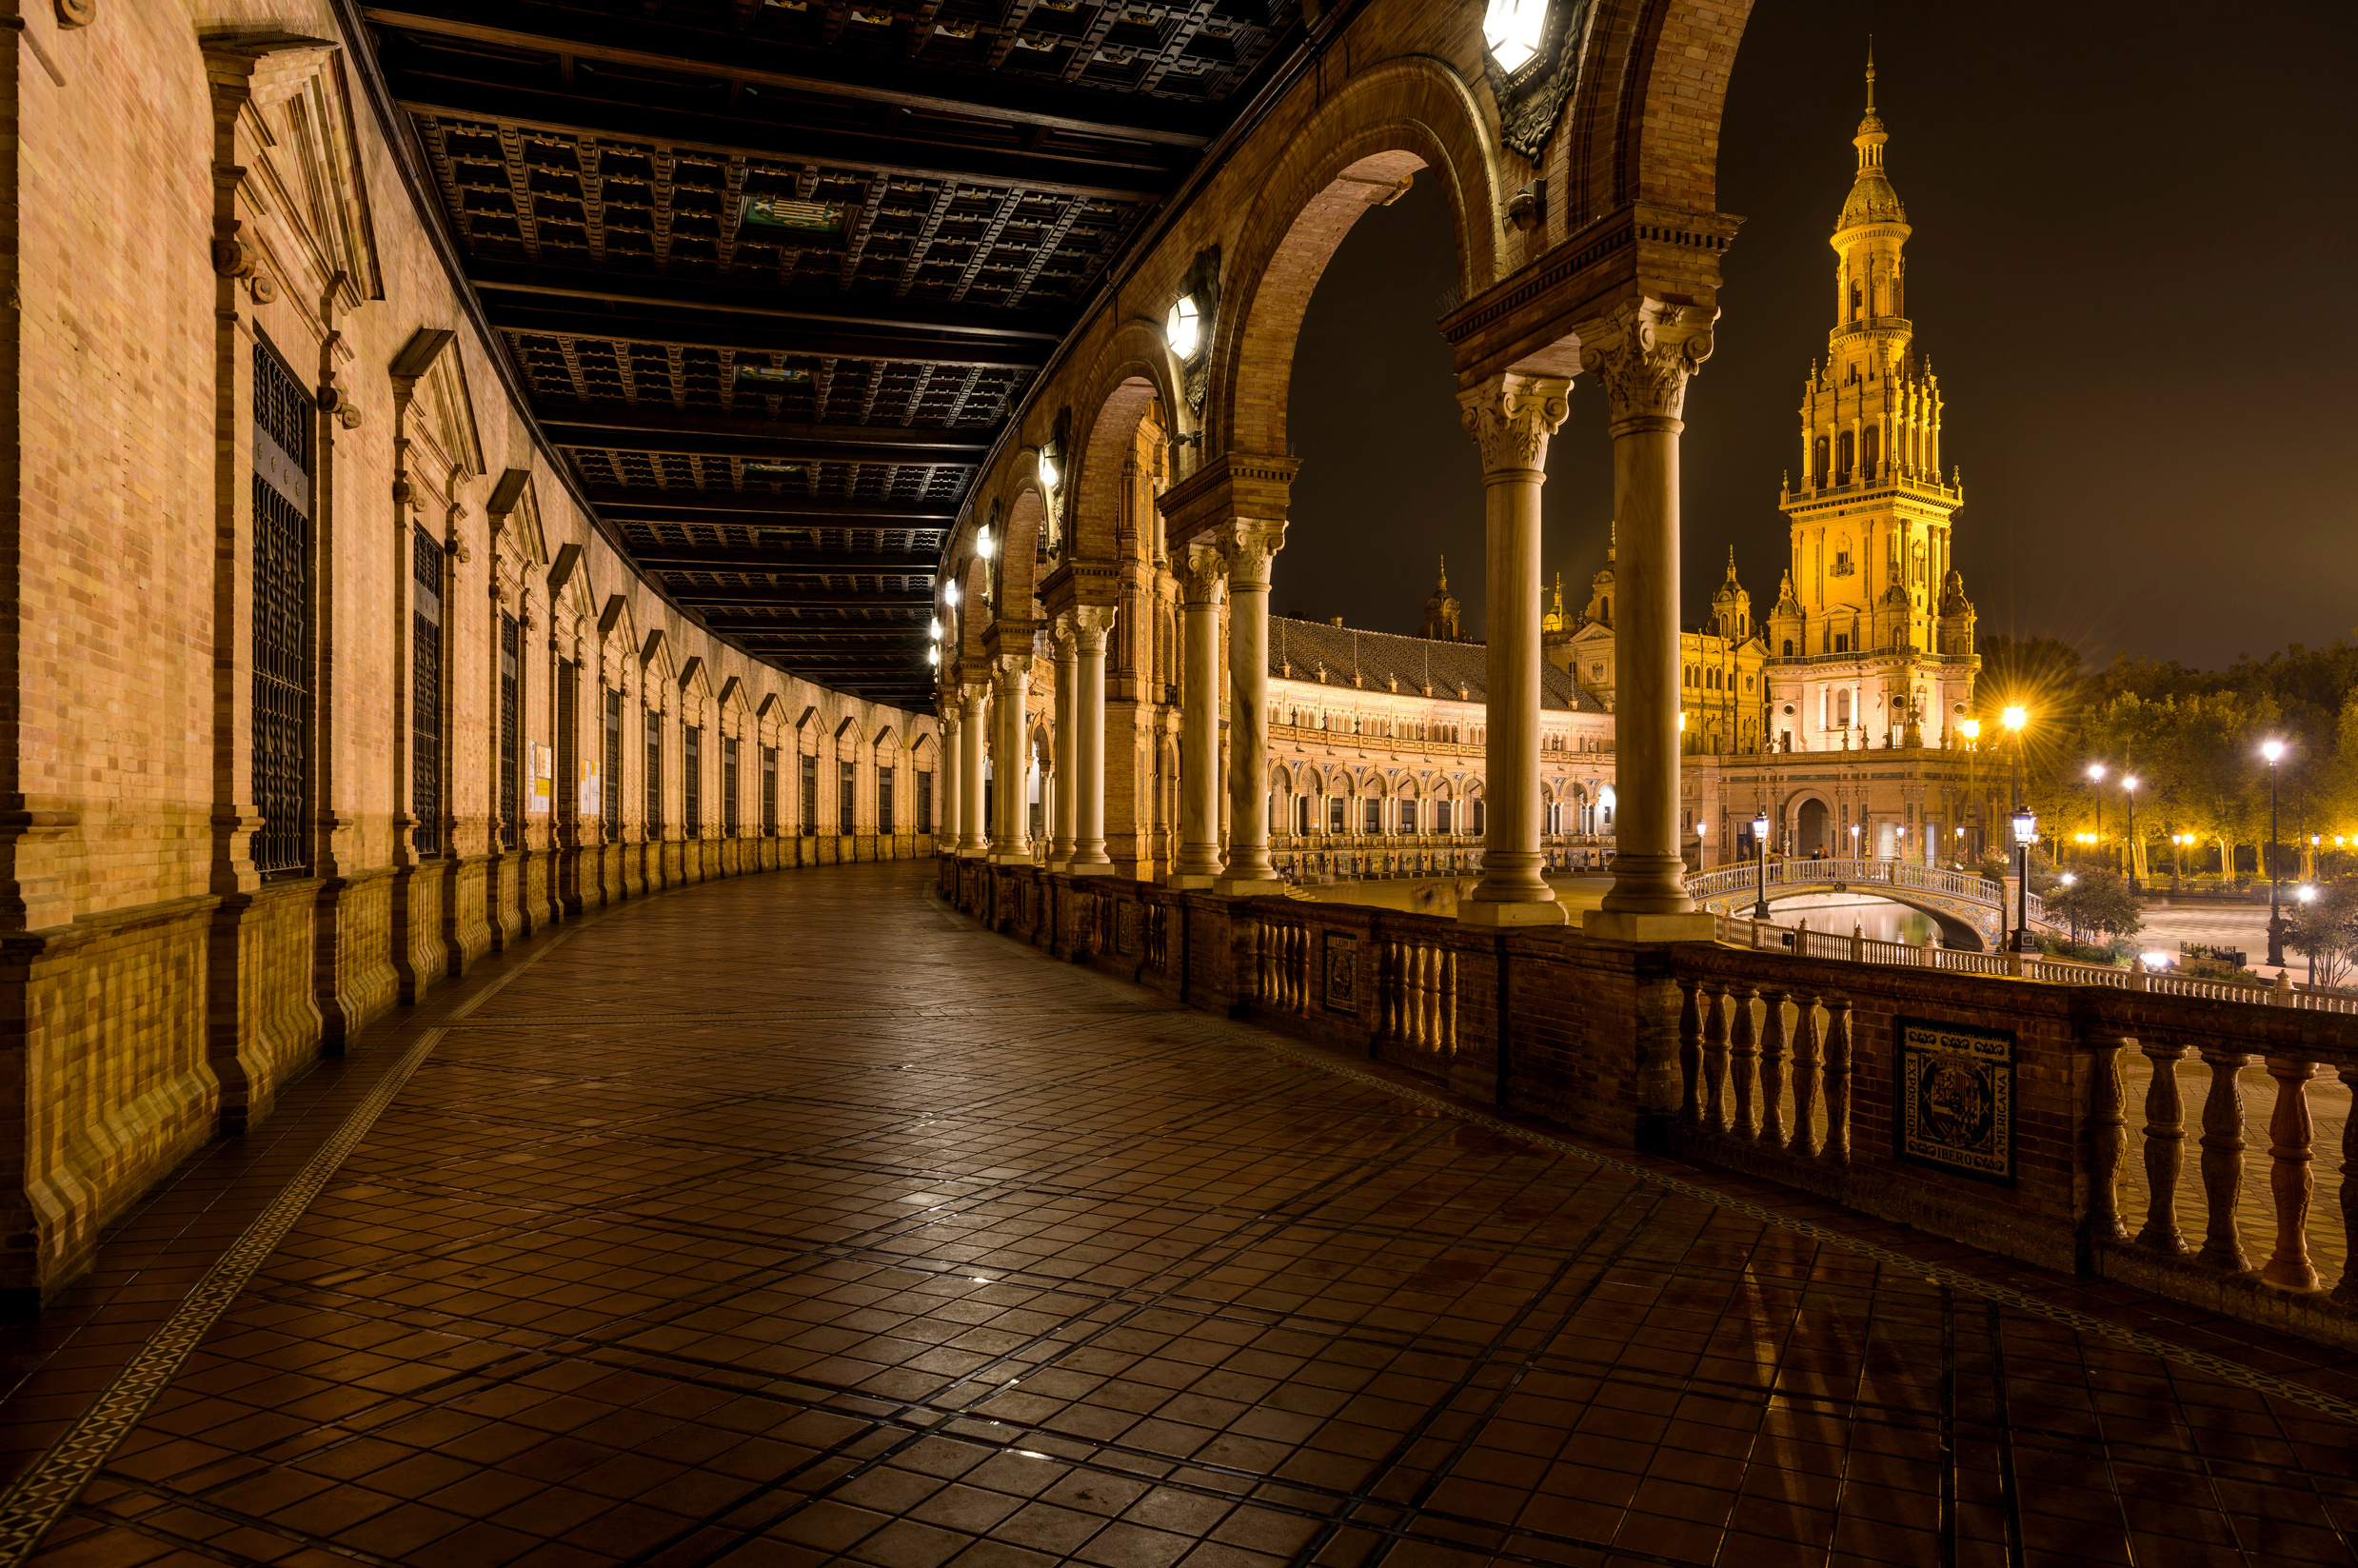 Spanish Square - A wide-angle night view of the illuminated ground-level portico curving along the semi-circular brick building at Spanish Square - Plaza de España, Seville. Andalusia, Spain.